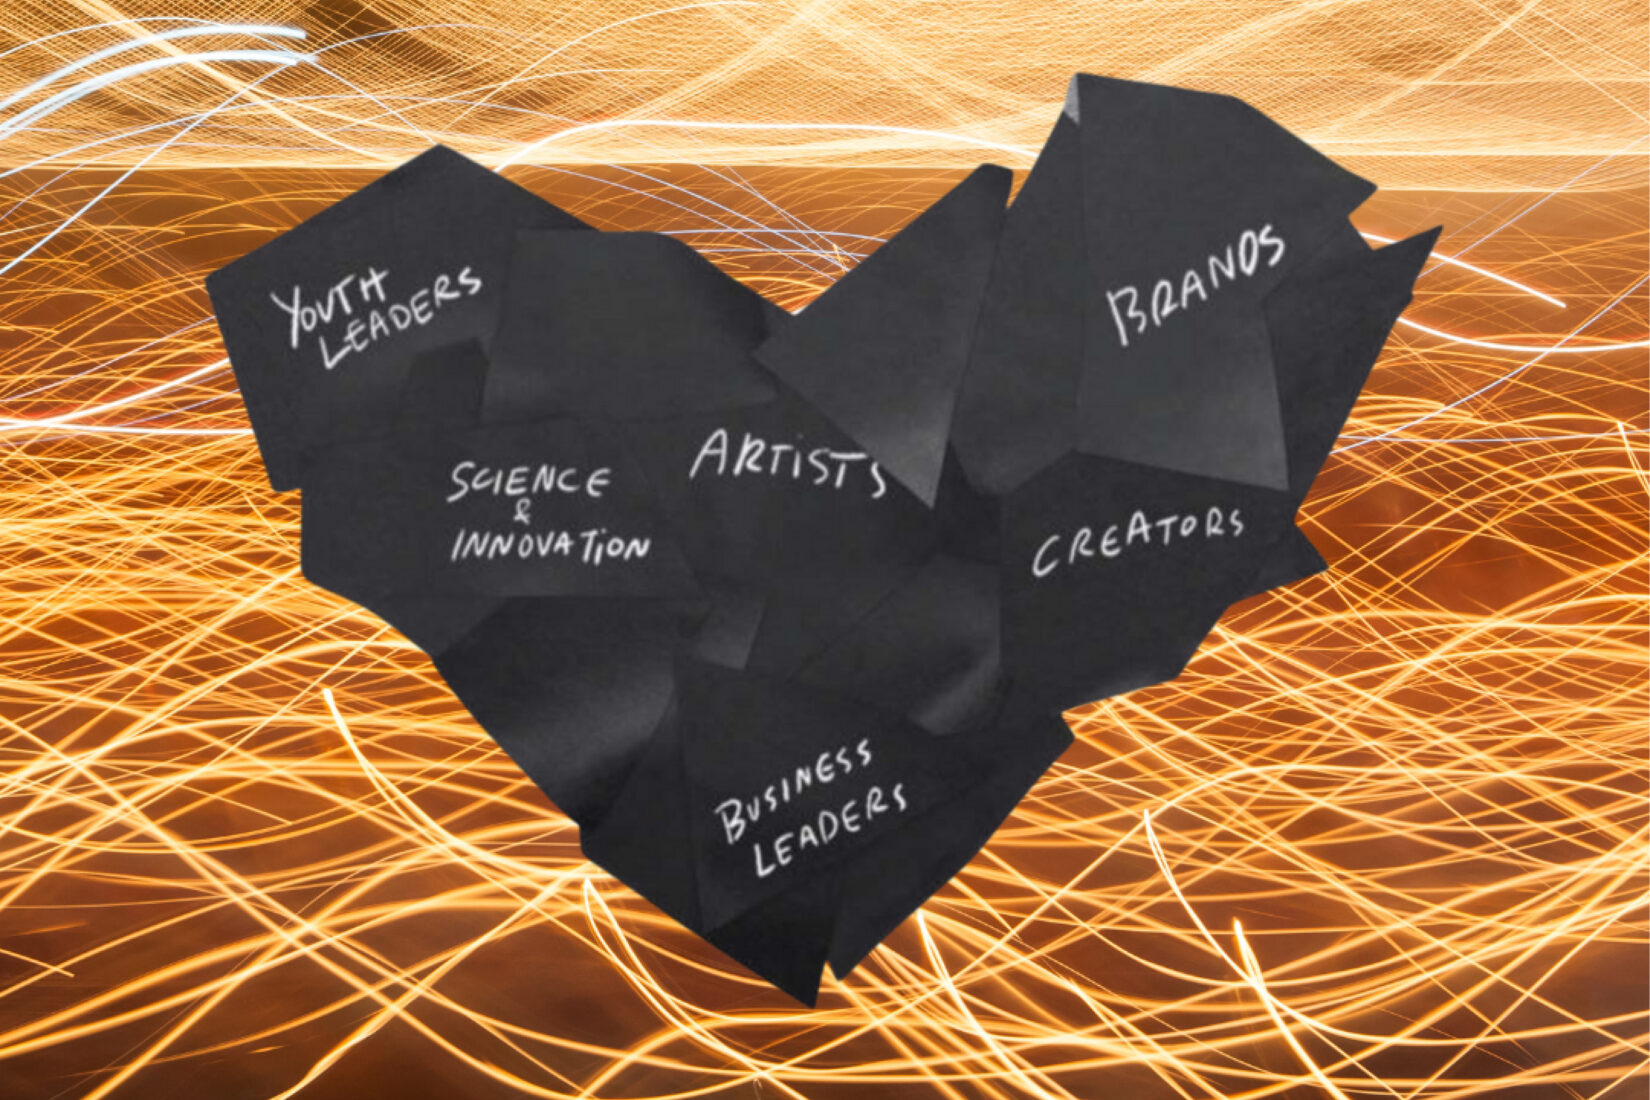 Representation of a black heart made of post-it bearing the words "Brands", "Creators", "Business leaders", "Artists"...